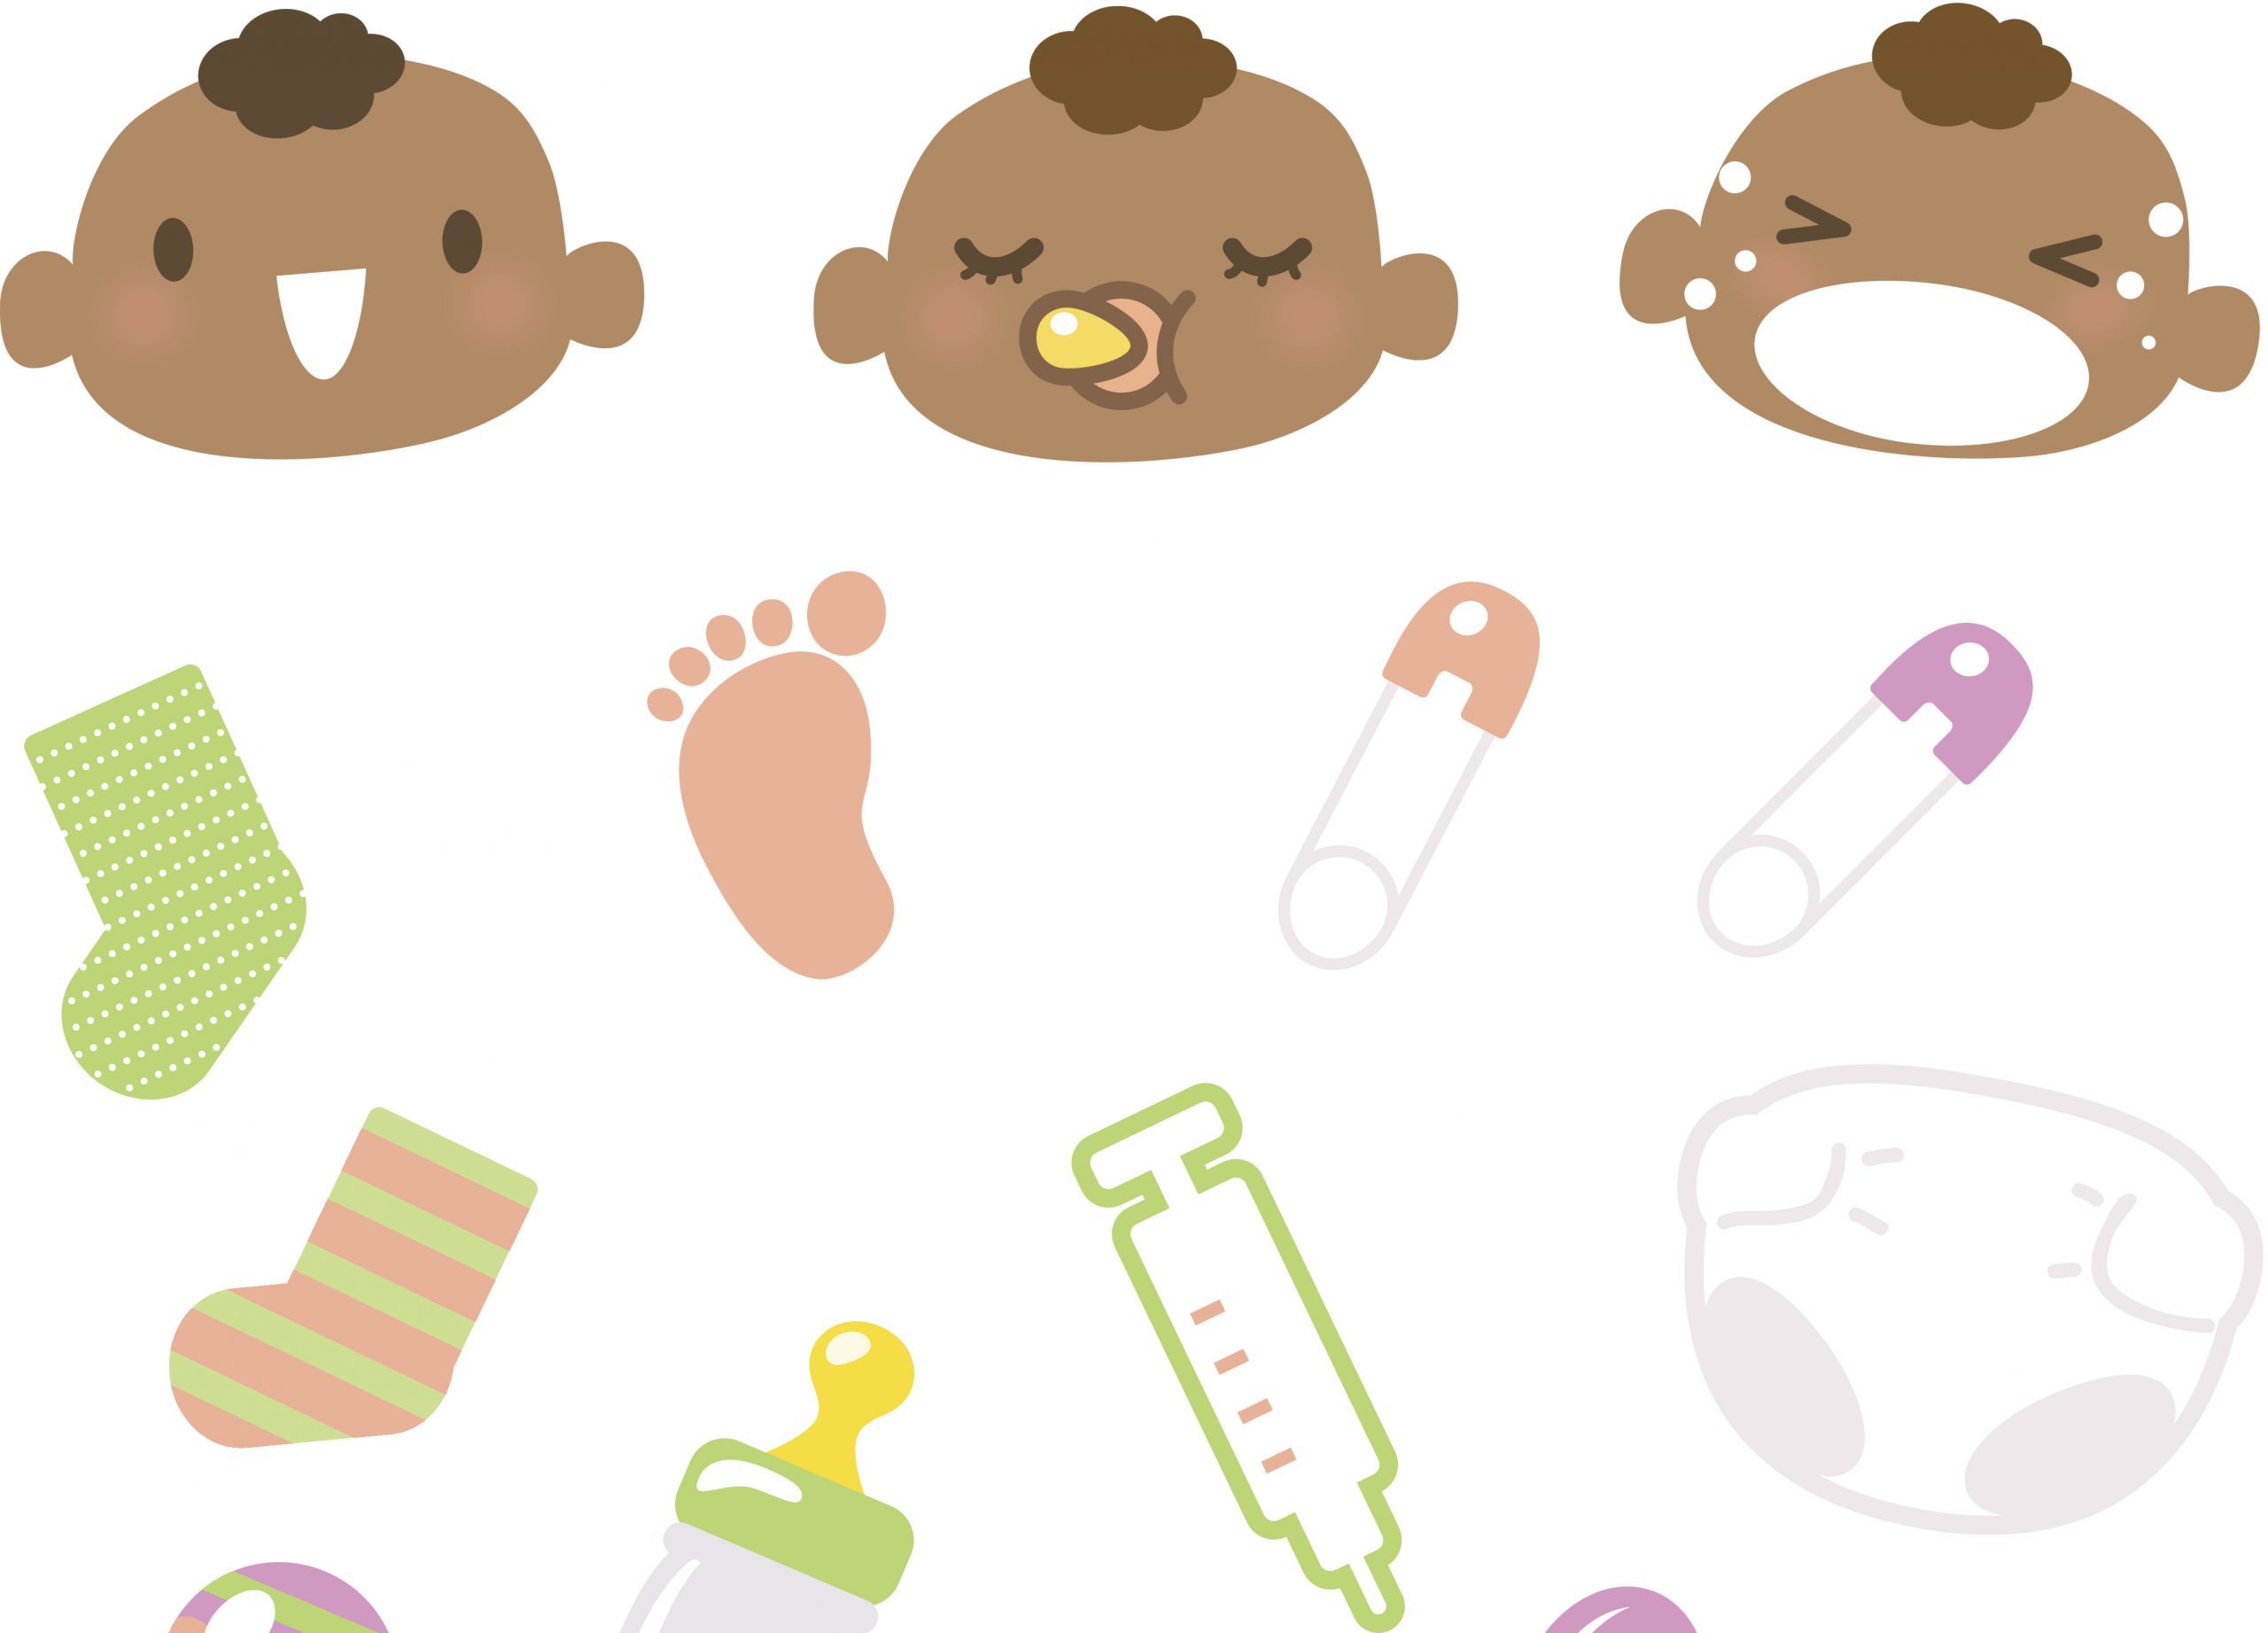 FUNIBER-icon-set-cute-babies-emoticons-and-baby-goods